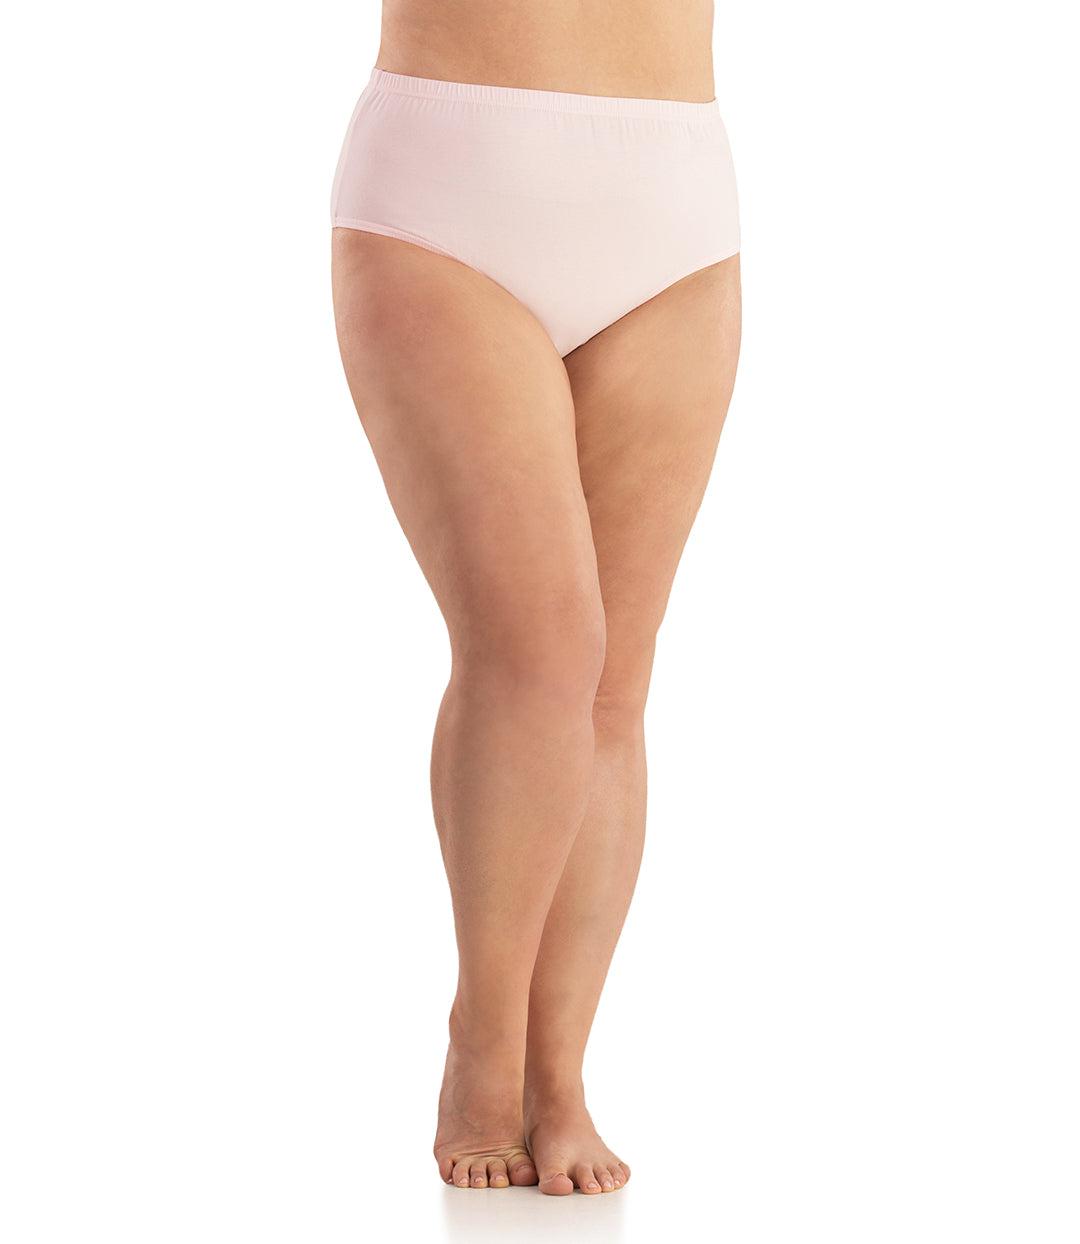 Bottom half of plus sized woman, facing front, wearing JunoActive Junowear Cotton Stretch Classic Brief in light pink. This brief fits to the waistline with conservative leg opening.